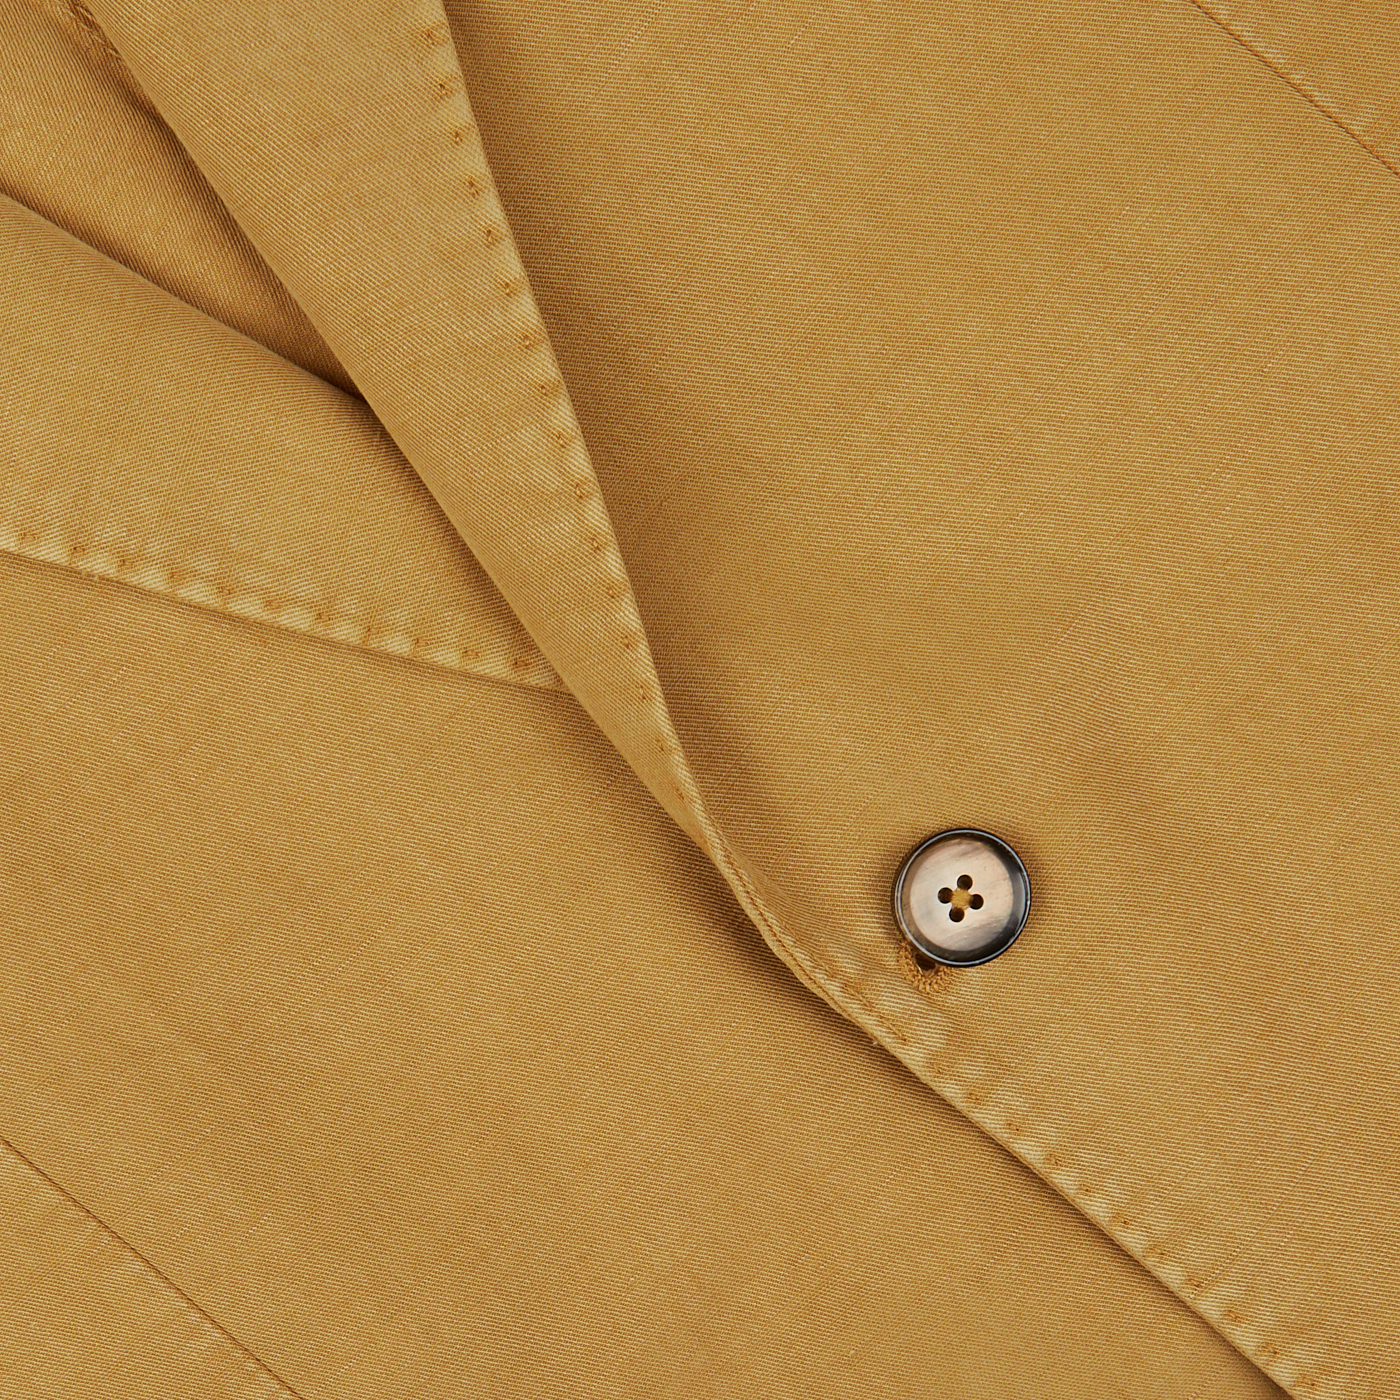 Close-up of a button on a Dark Beige Washed Cotton Linen Blazer from L.B.M. 1911 with visible stitching.